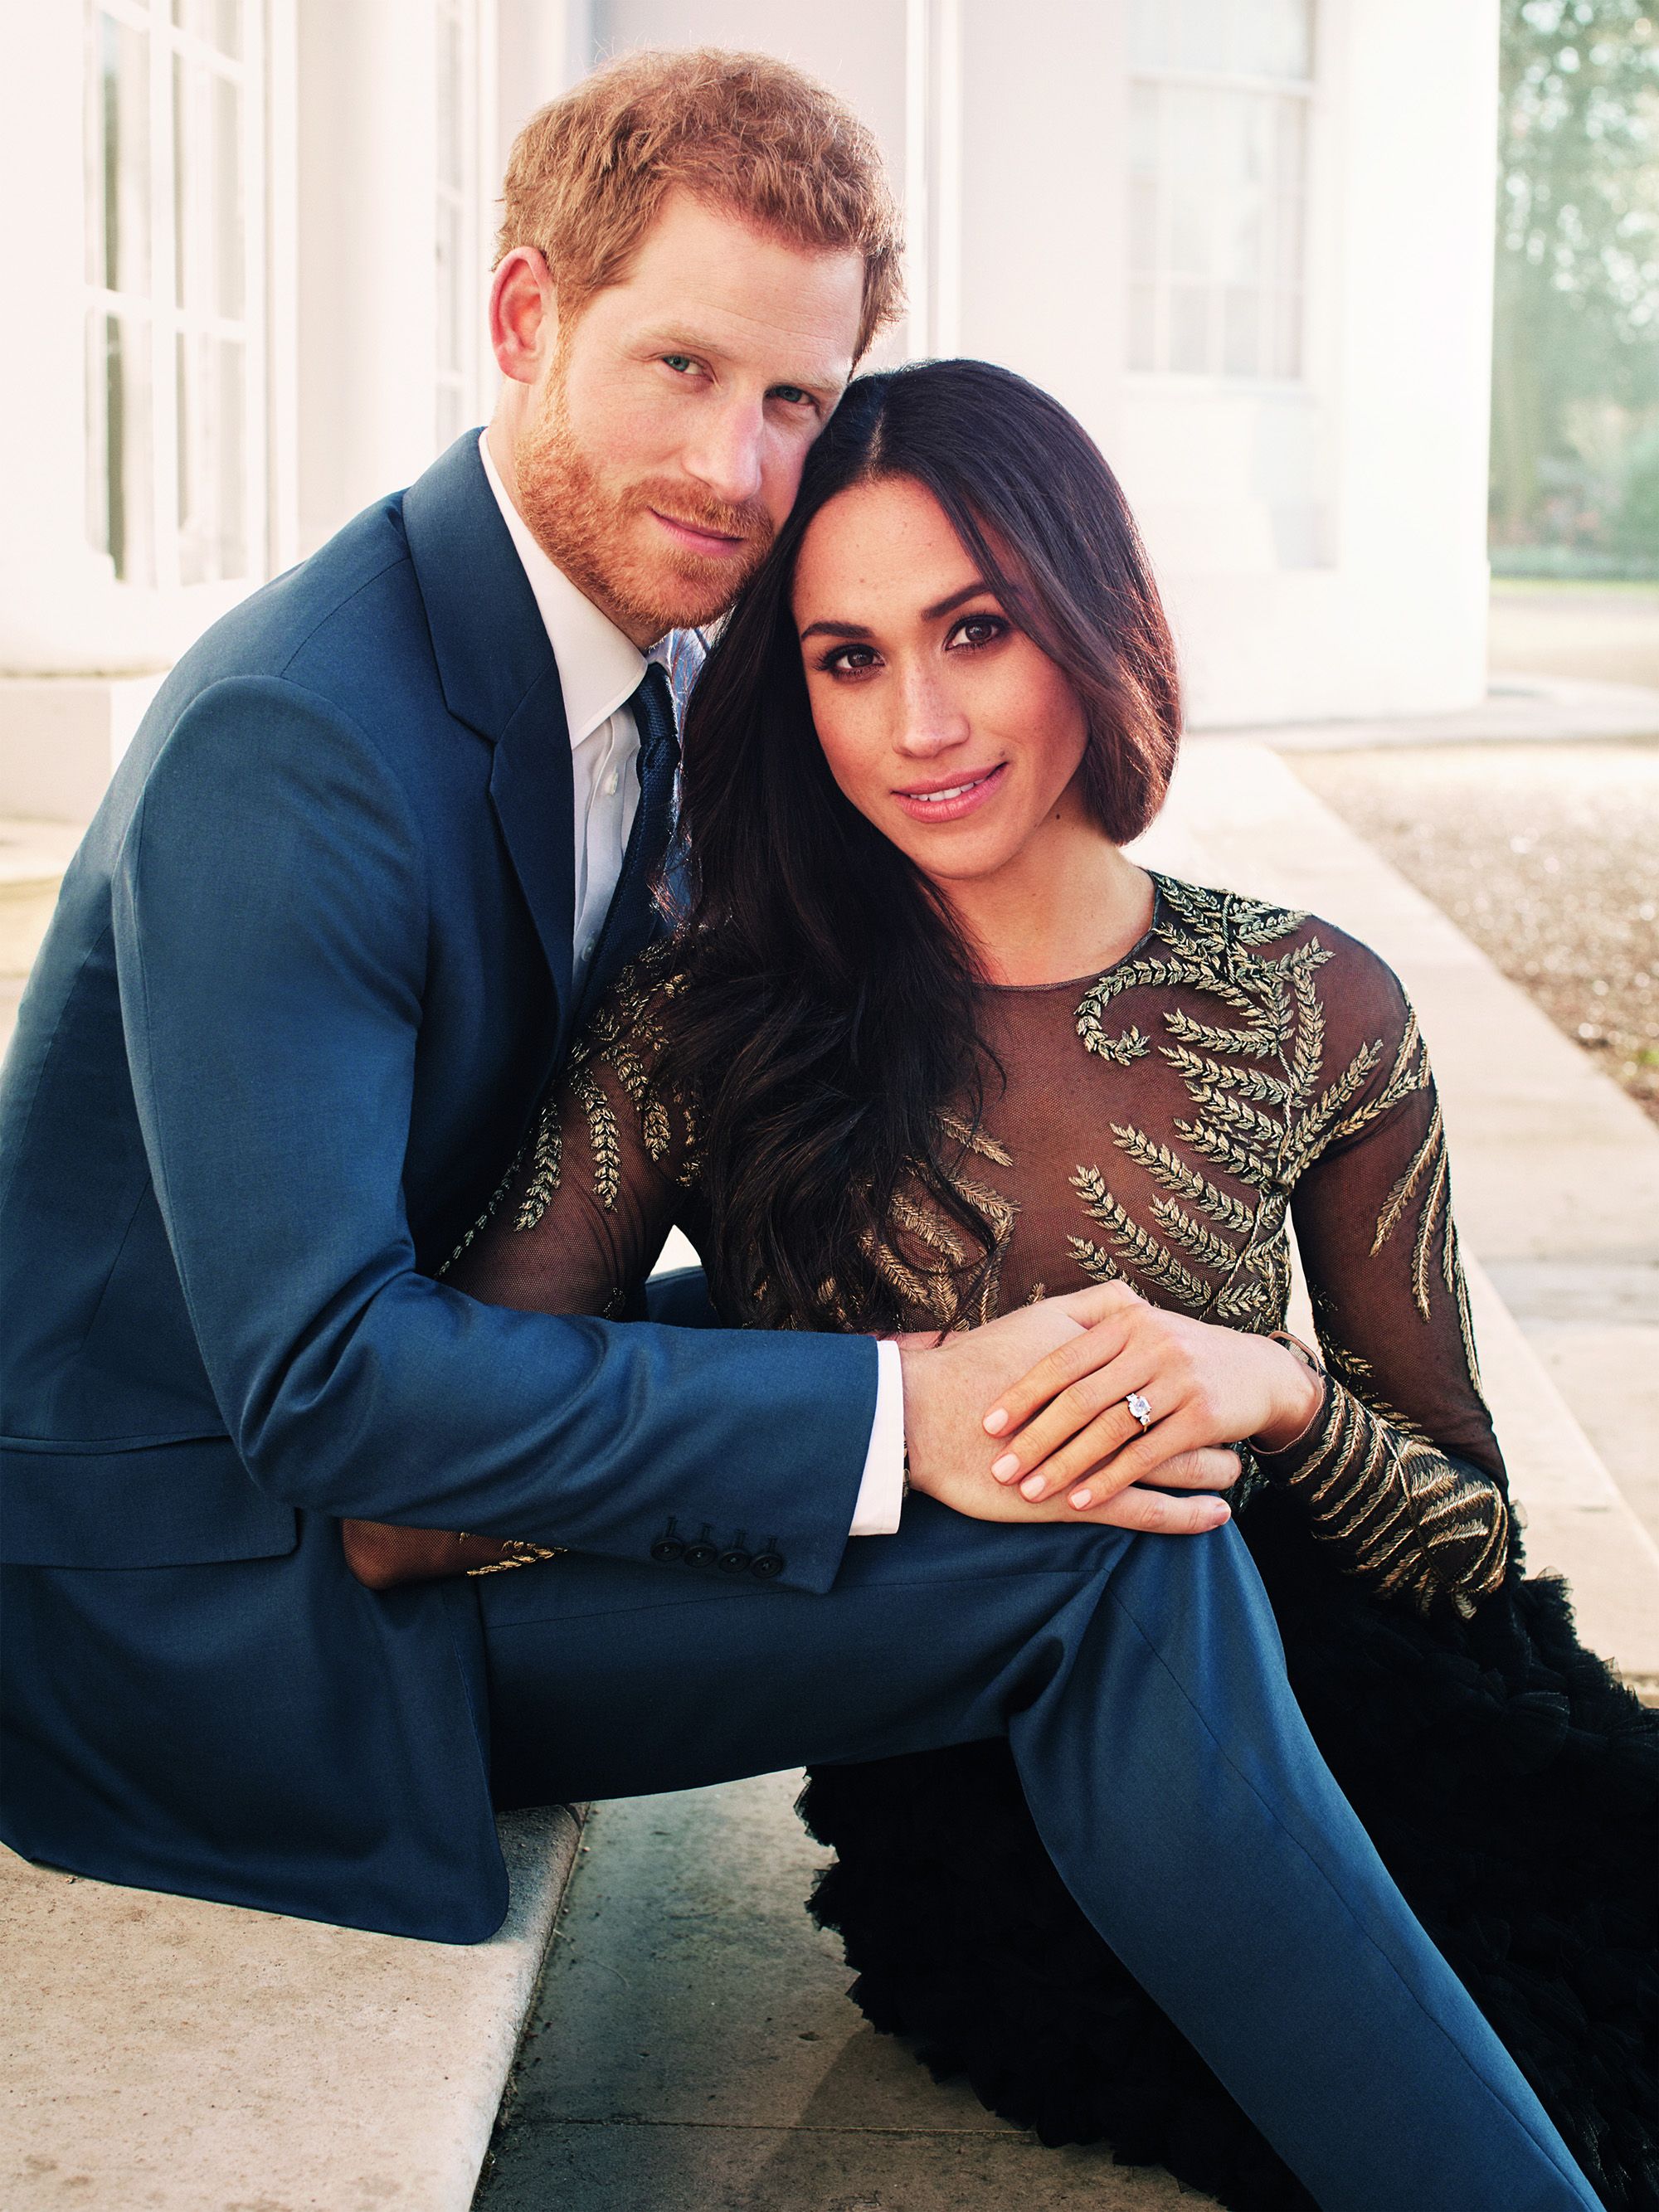 Prince Harry and Meghan Markle Speak Out on Their Royal Romance | Meghan  markle engagement ring, Meghan markle wedding ring, Engagement ring cuts